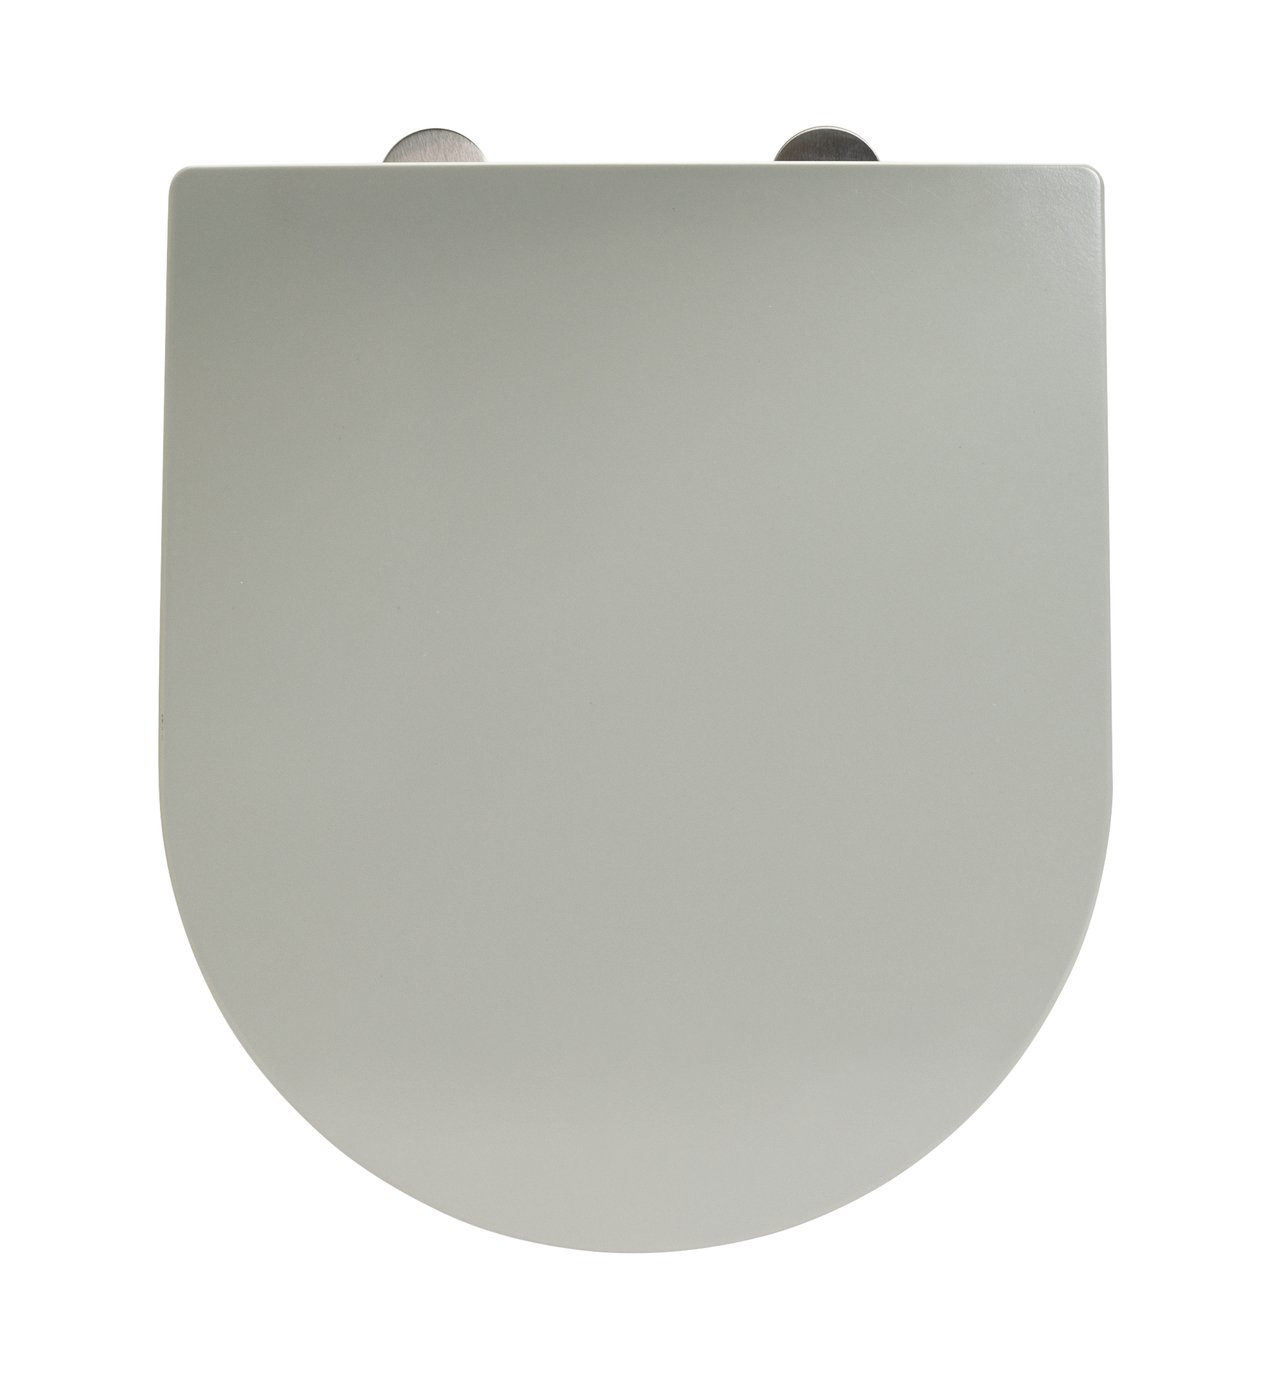 Argos Home Thermoplastic D-Shaped Toilet Seat - Grey